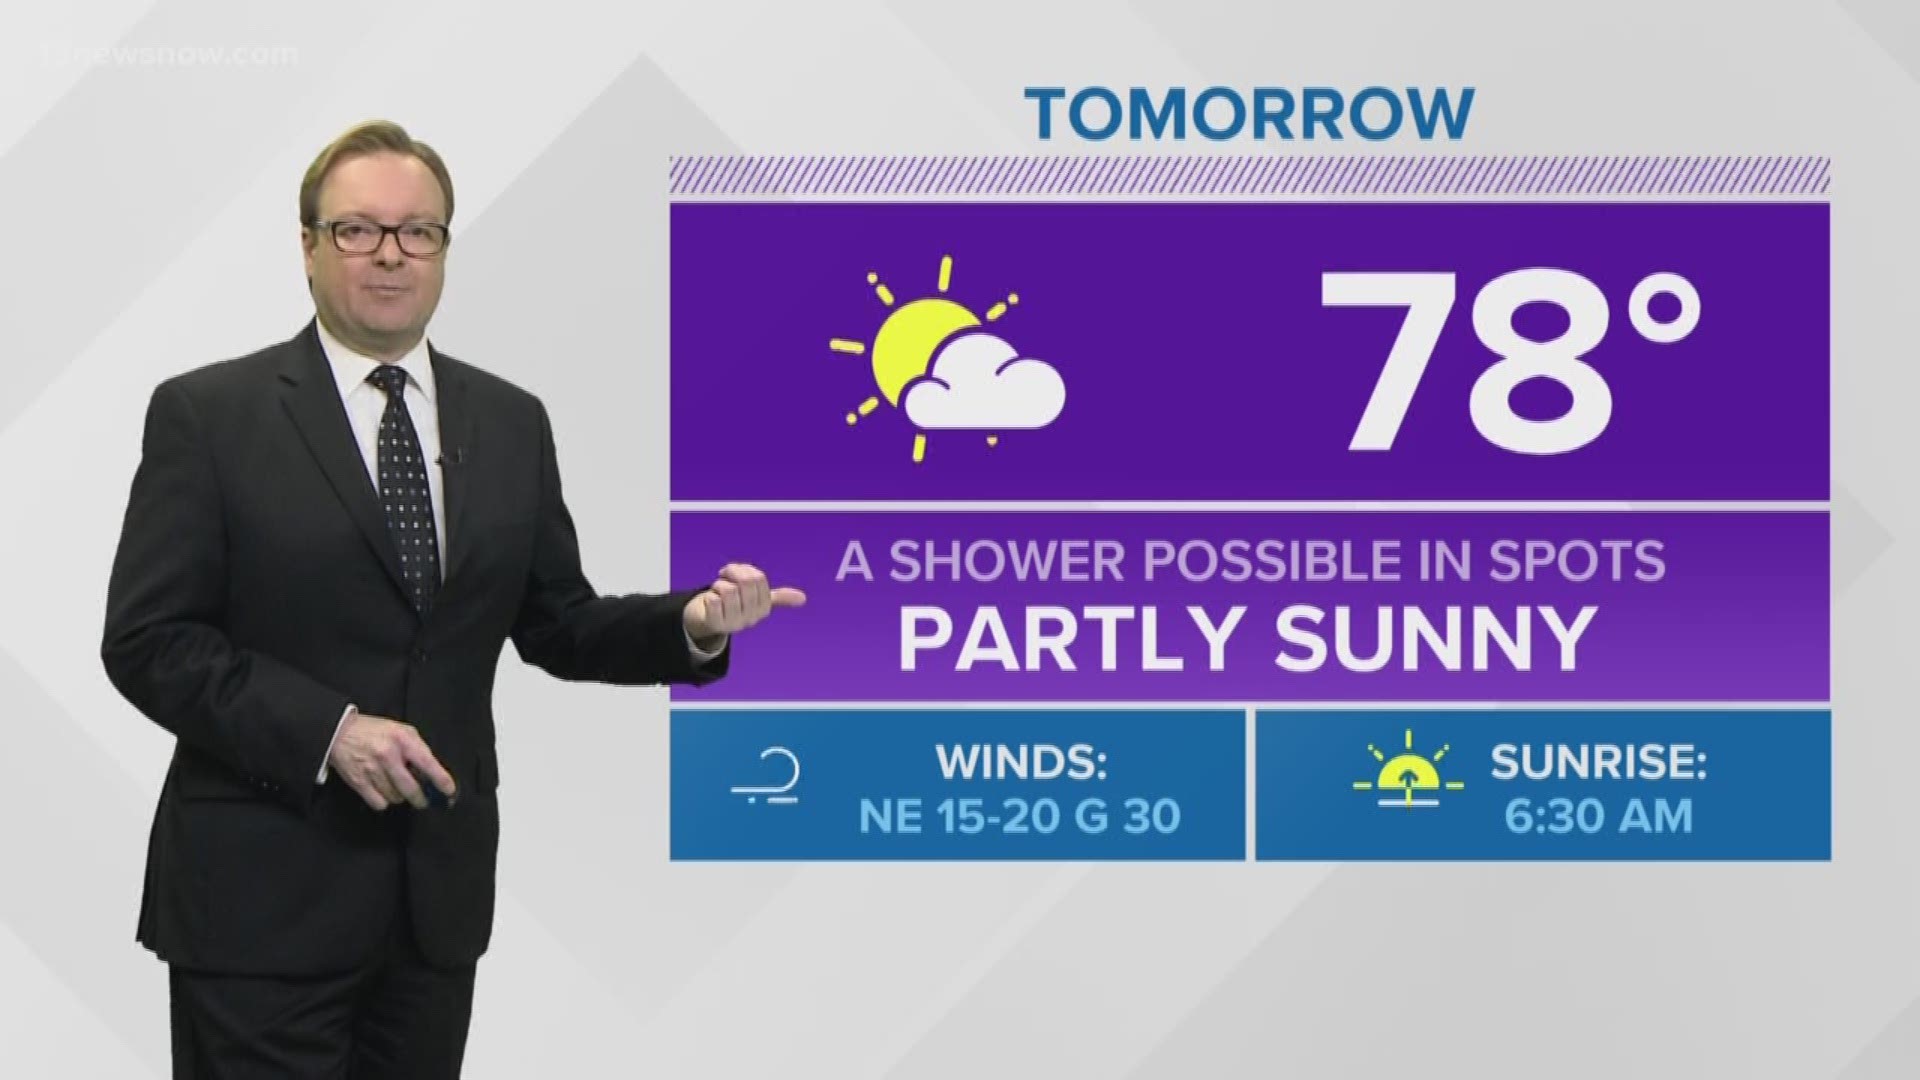 Meteorologist Evan Stewart brings you the forecast from the Weather Authority.